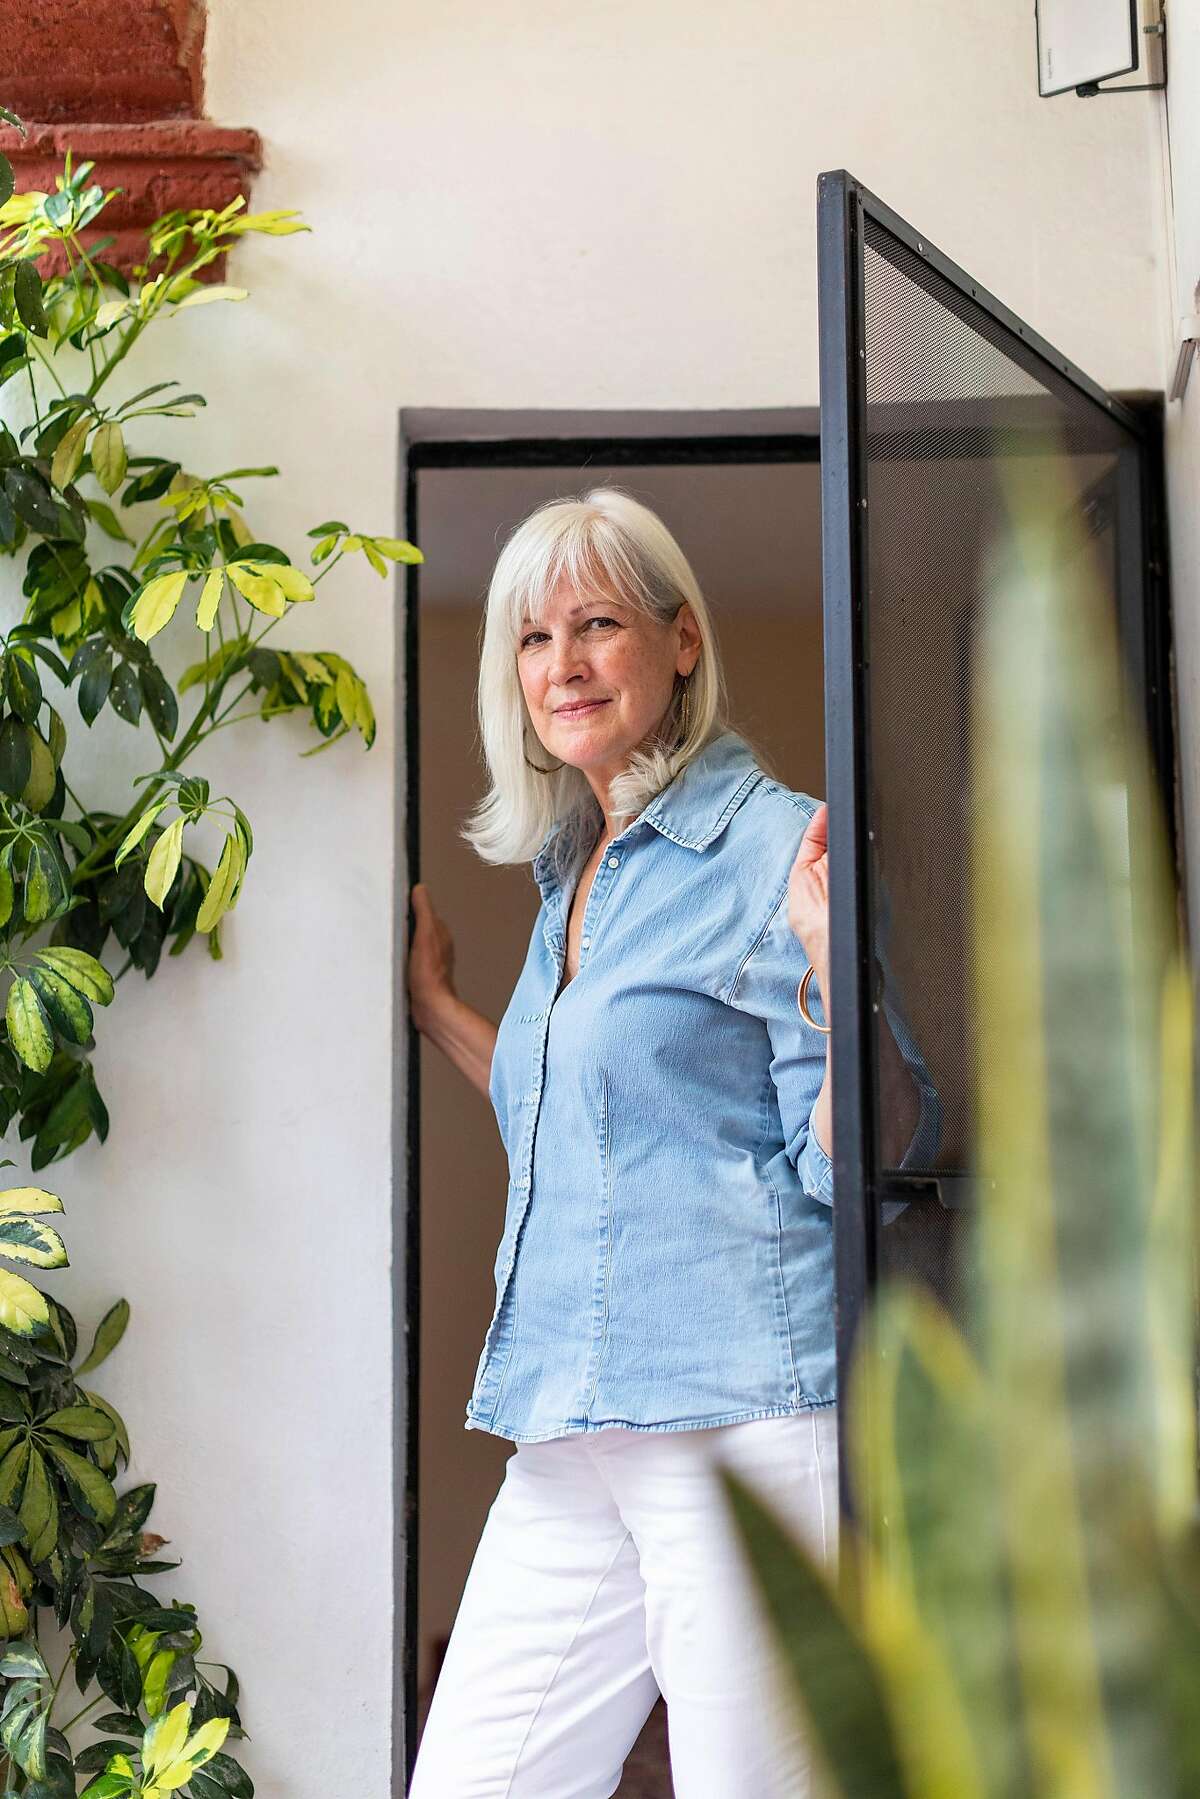 Claudia Peresman, who moved from Stonington, Conn., at her home in San Miguel de Allende, Mexico, June 22, 2019. As the number of U.S. retirees living overseas grows, more of them are confronting choices about medical care, because Medicare does not pay for care outside the country, except in limited circumstances. (Alejandro Cartagena/The New York Times)